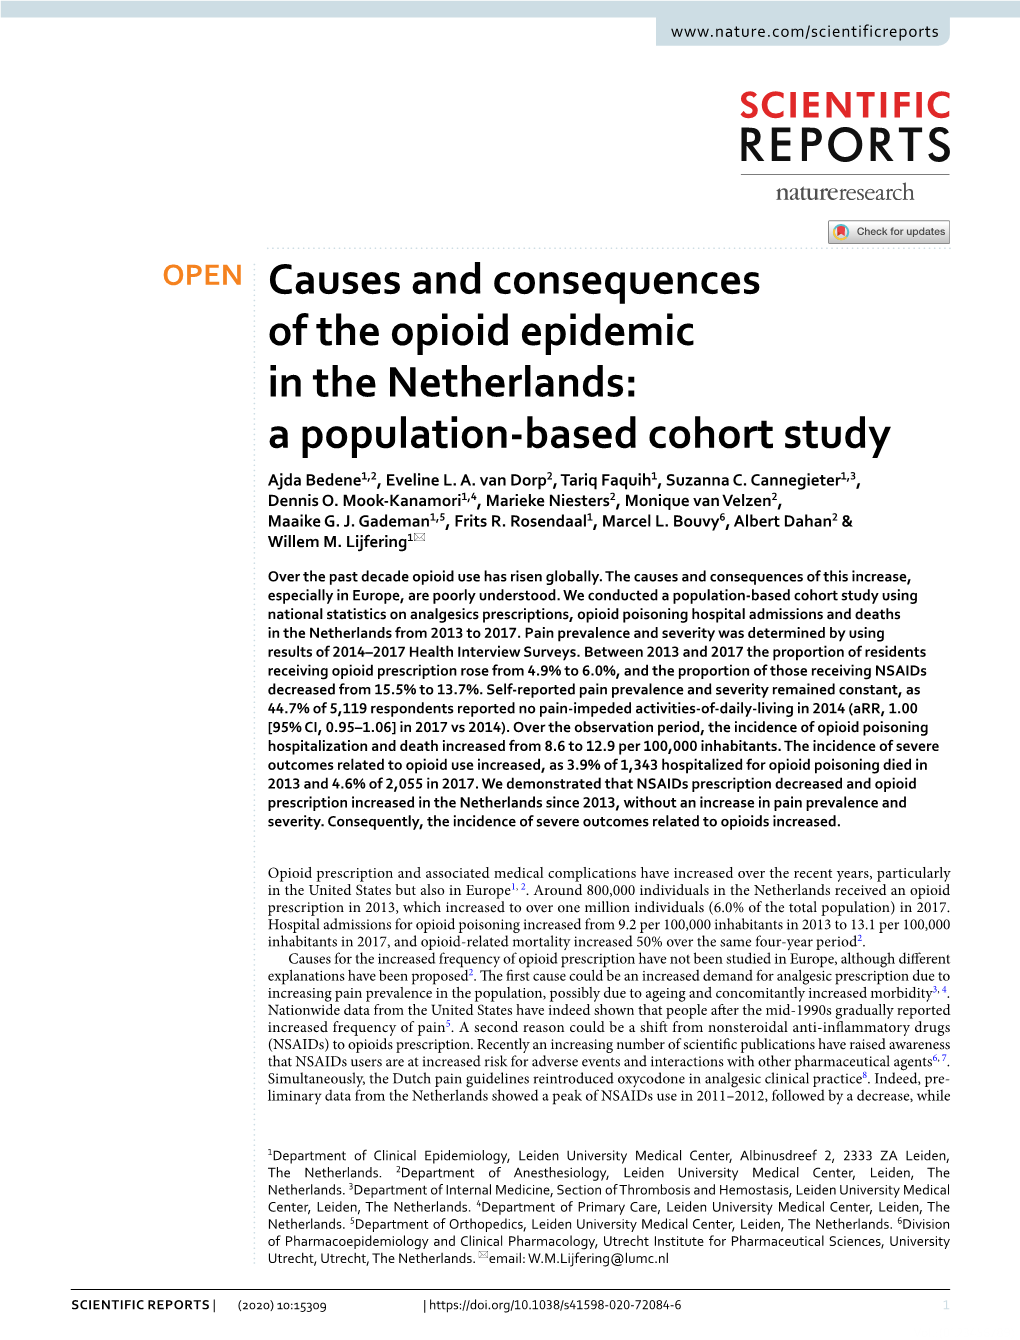 Causes and Consequences of the Opioid Epidemic in the Netherlands: a Population‑Based Cohort Study Ajda Bedene1,2, Eveline L